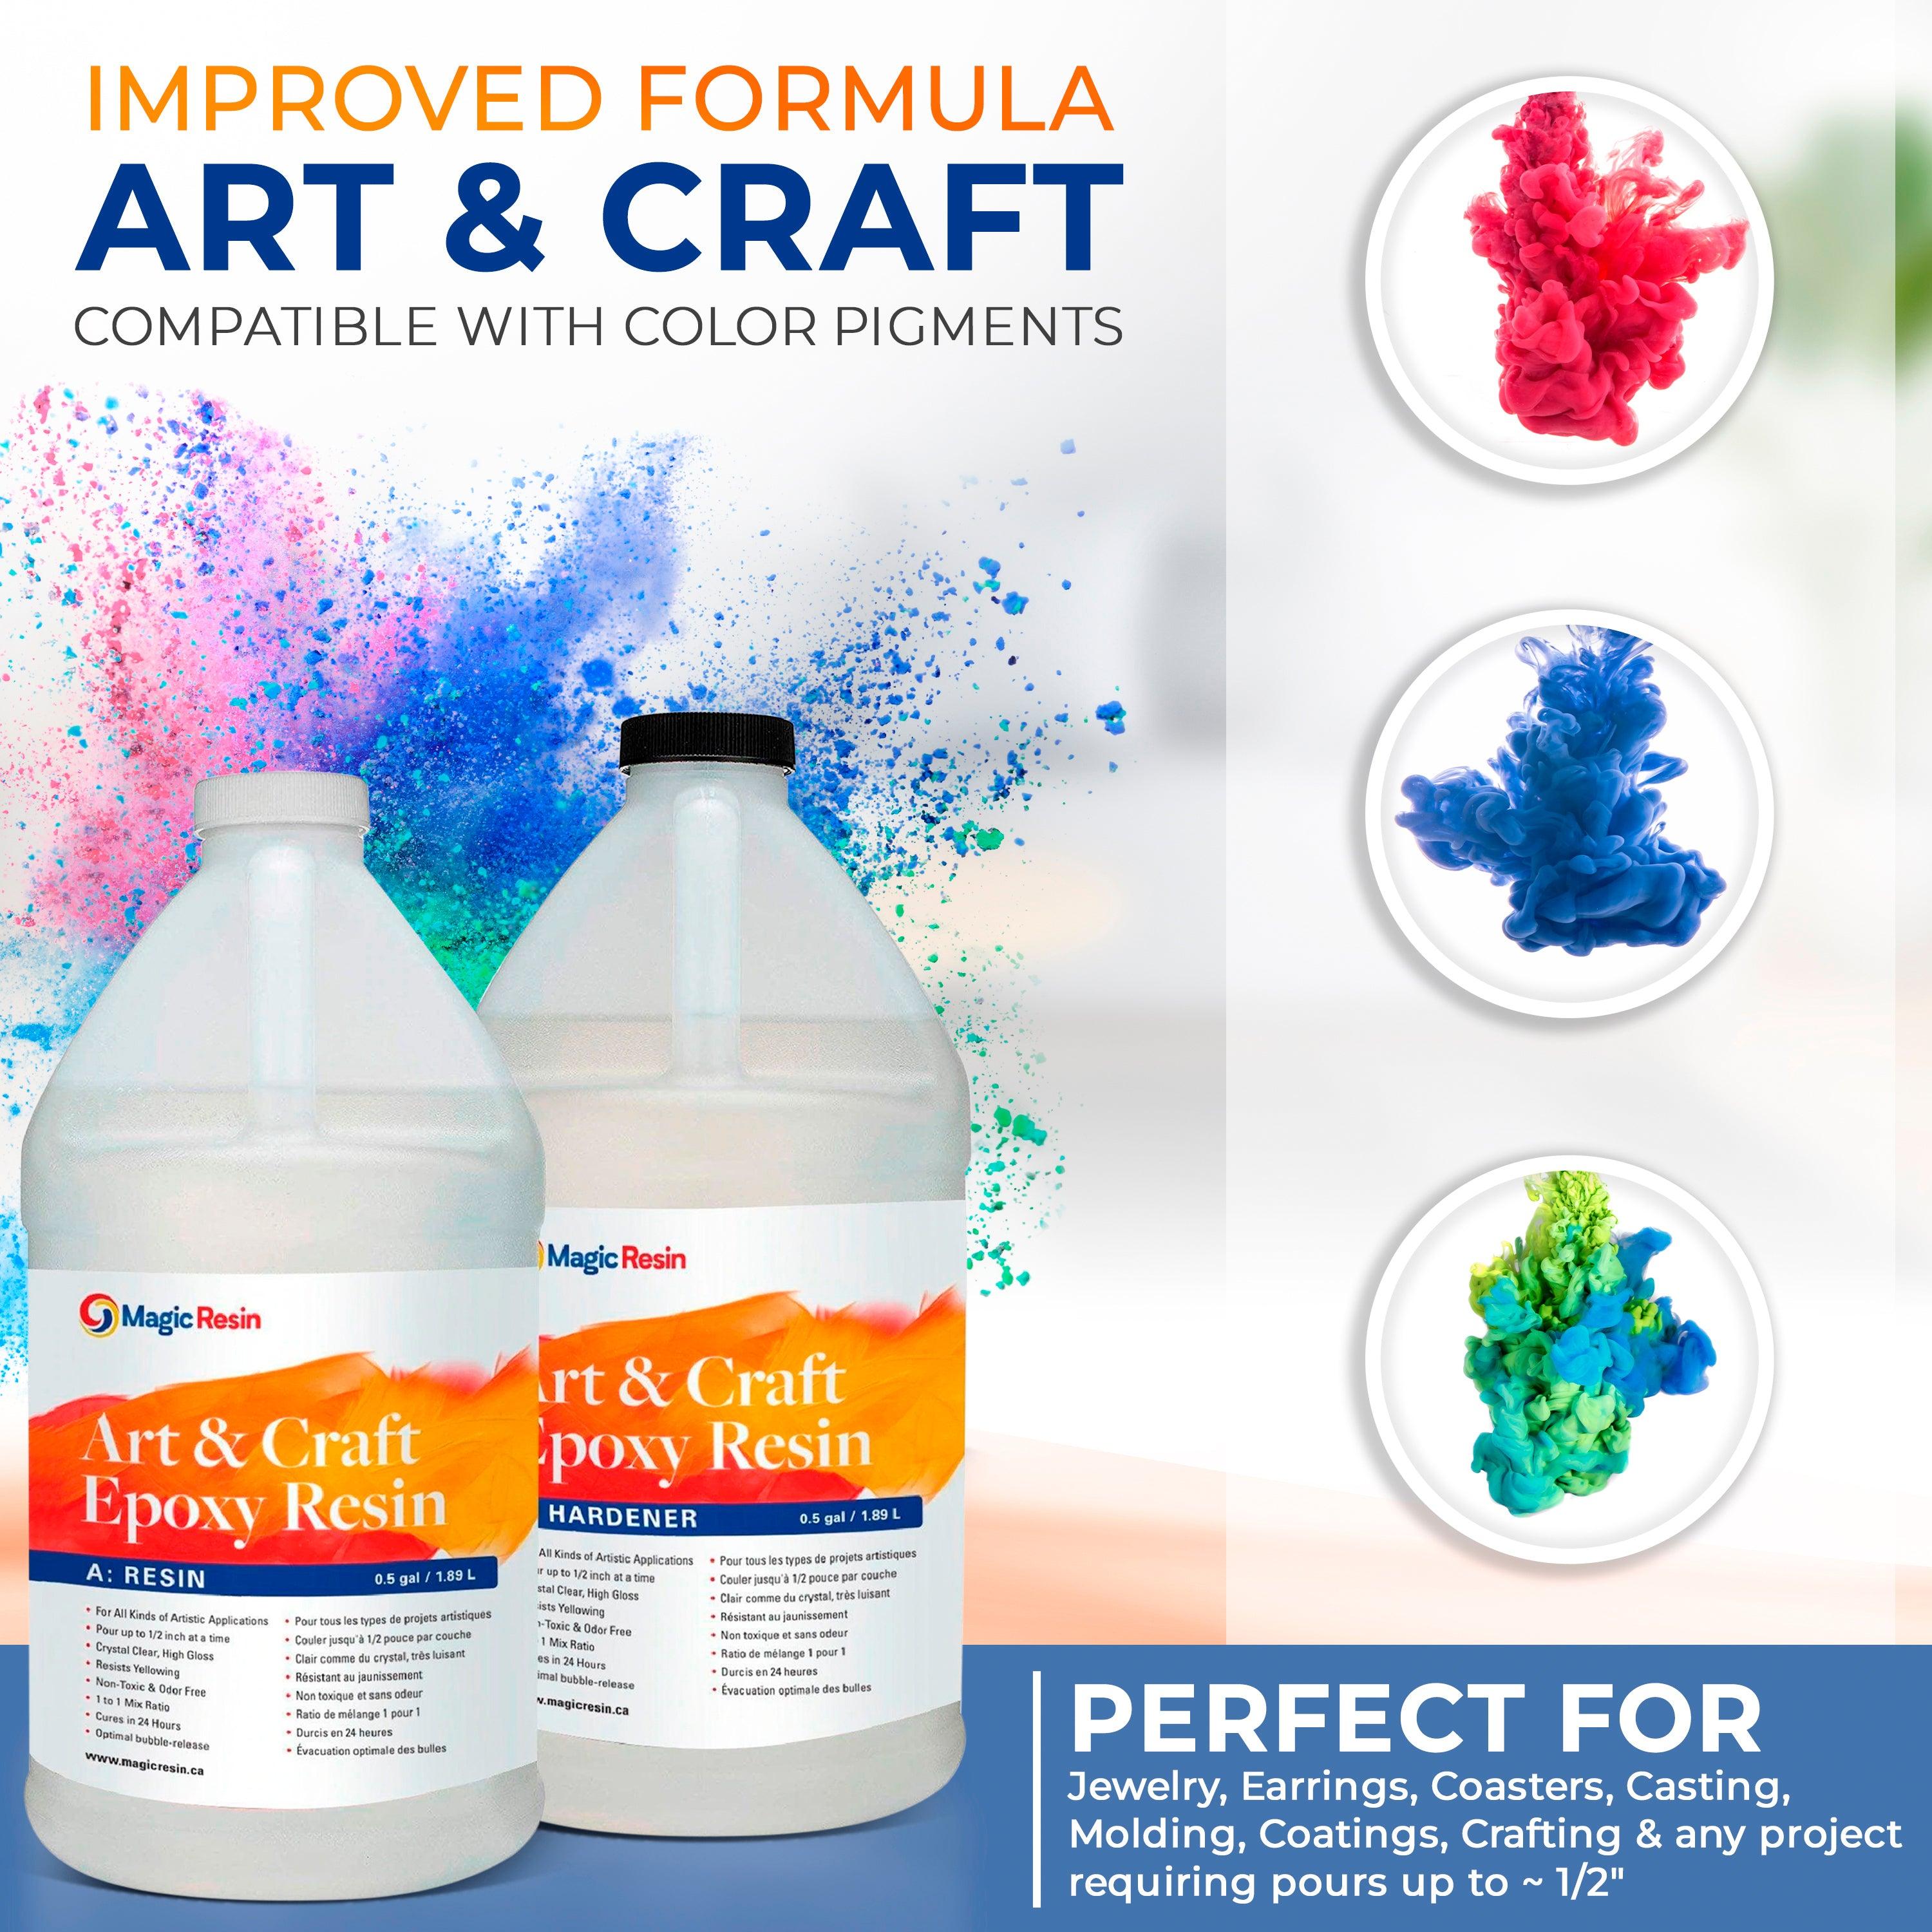 1 Gallon (3.78 L) | Art & Craft Epoxy Resin Kit | Includes 3 pairs of gloves, 2 cups, 4 sticks & 5 x 5g mica powder bags | Free express shipping - Magic Resin USA